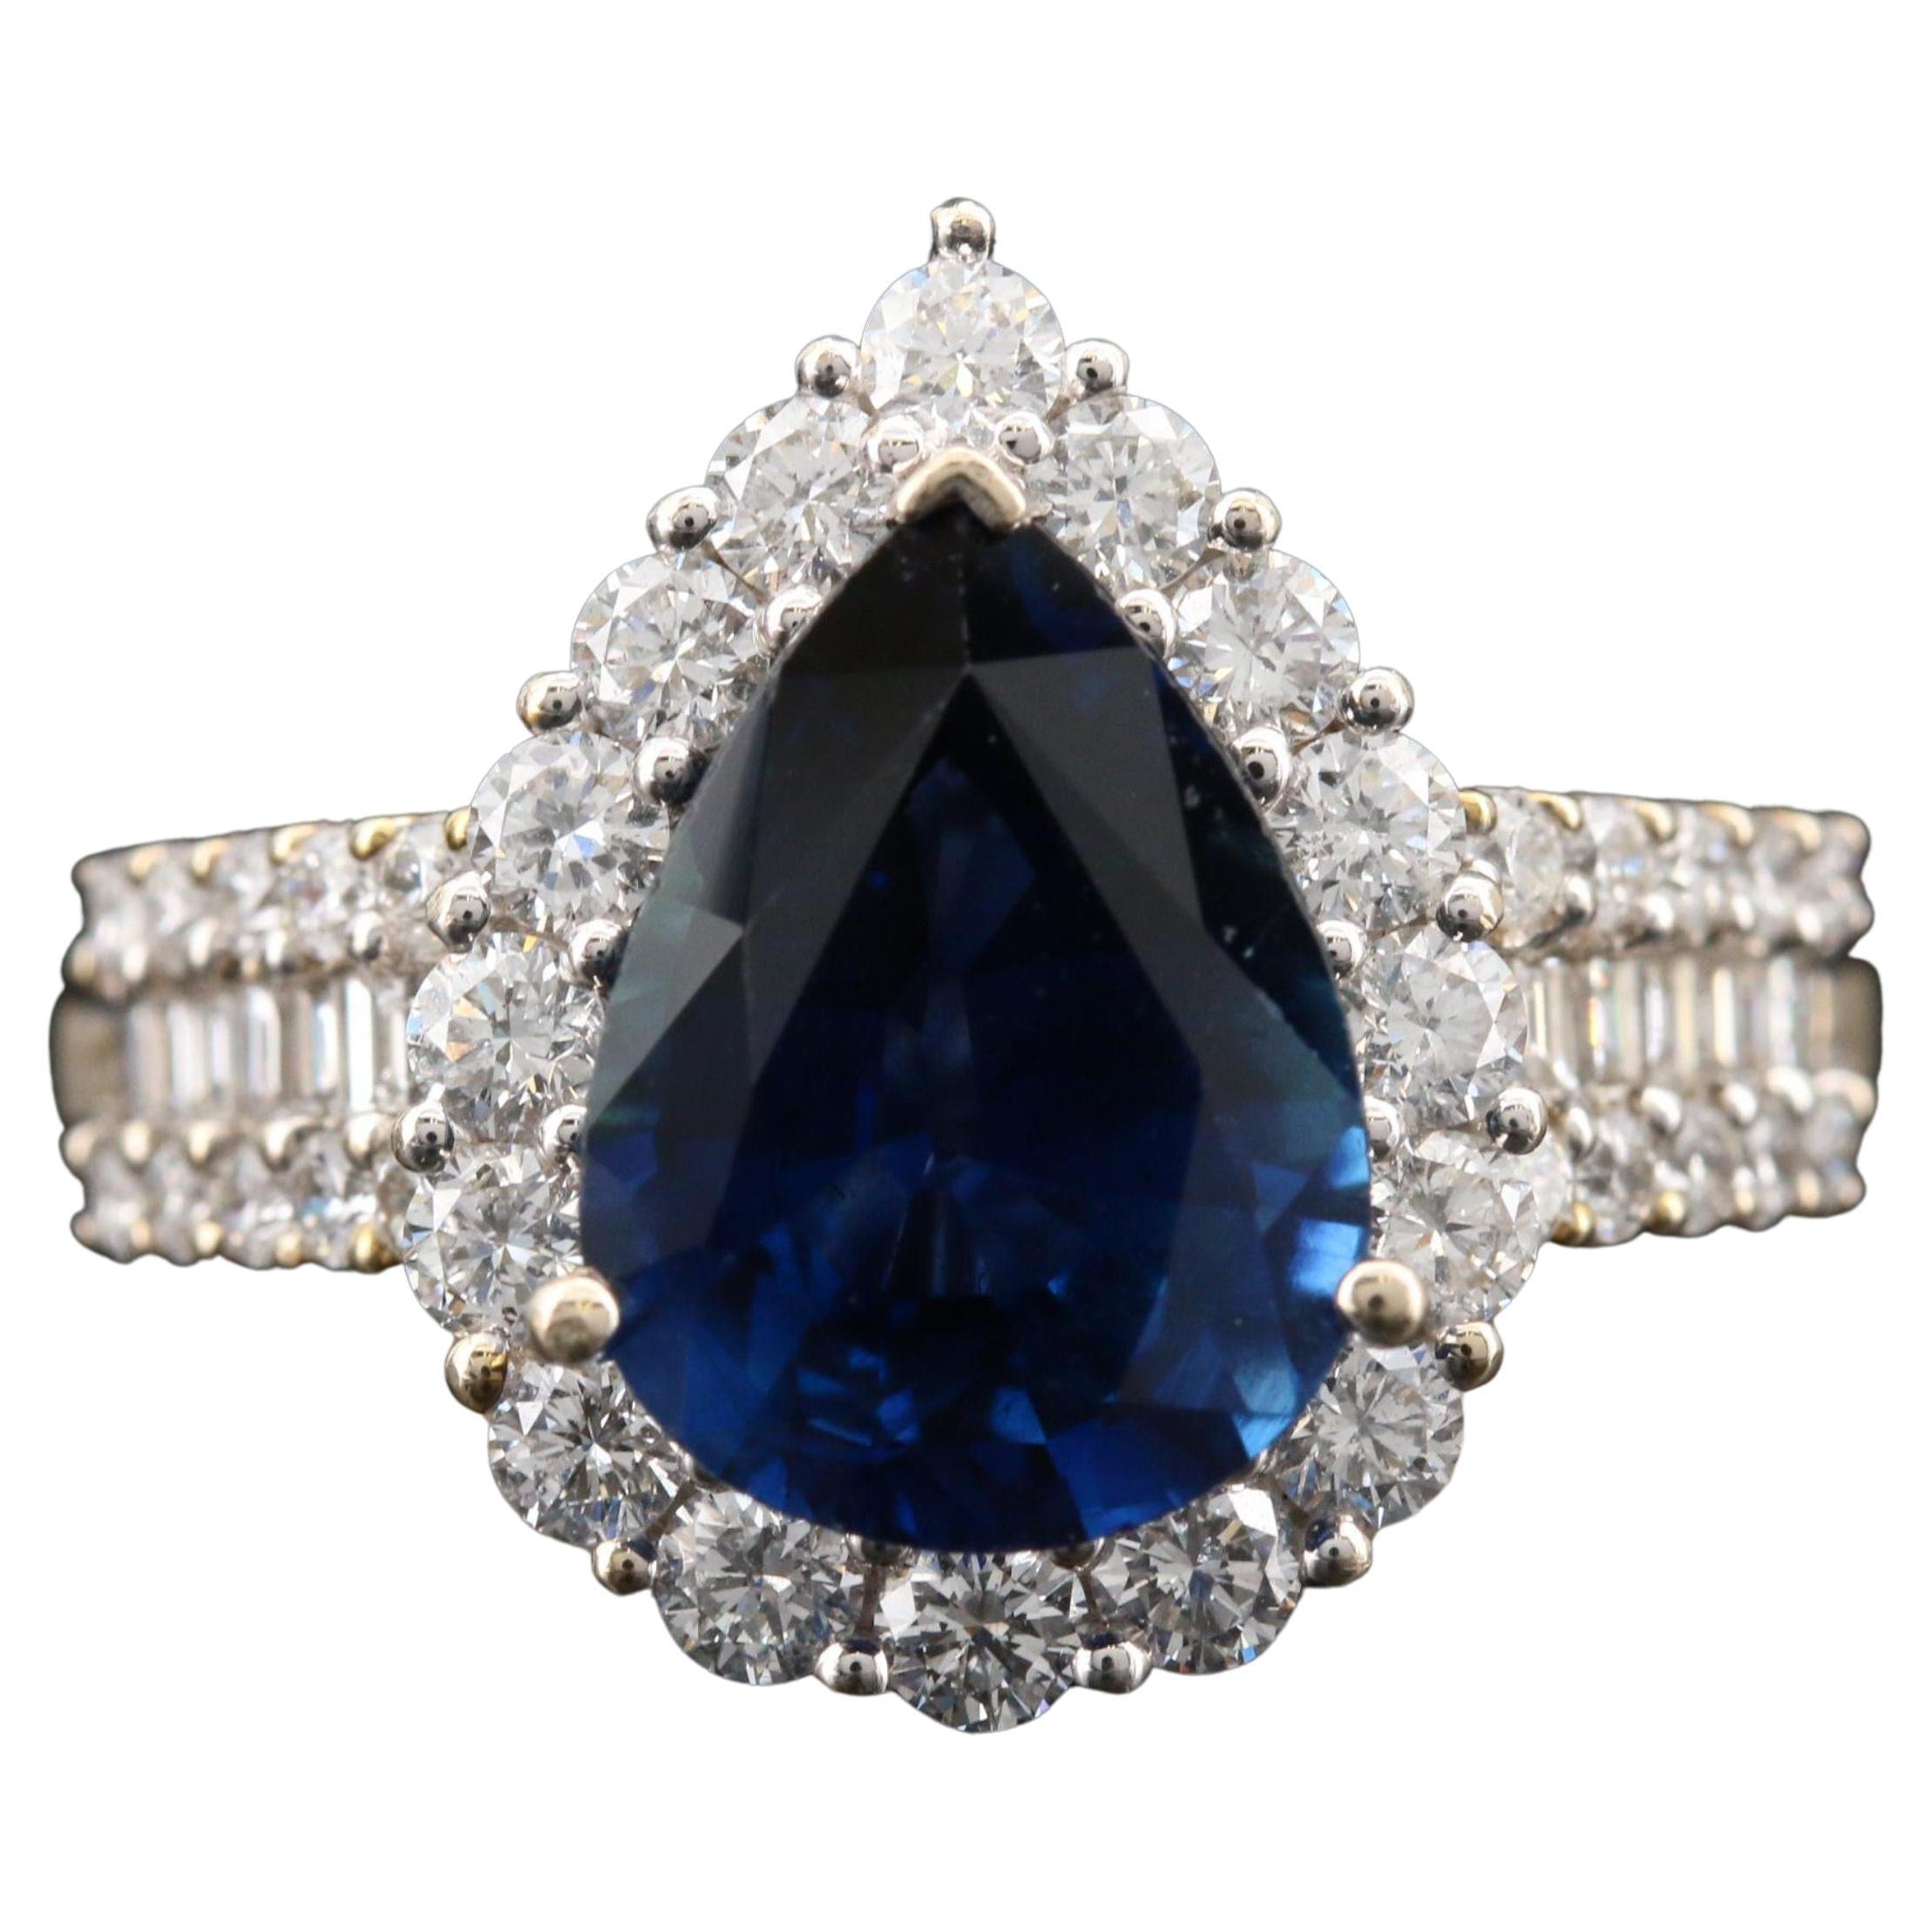 Pear Cut 3.6 Carat Sapphire & Diamond White Gold Engagement Ring Cocktail Ring